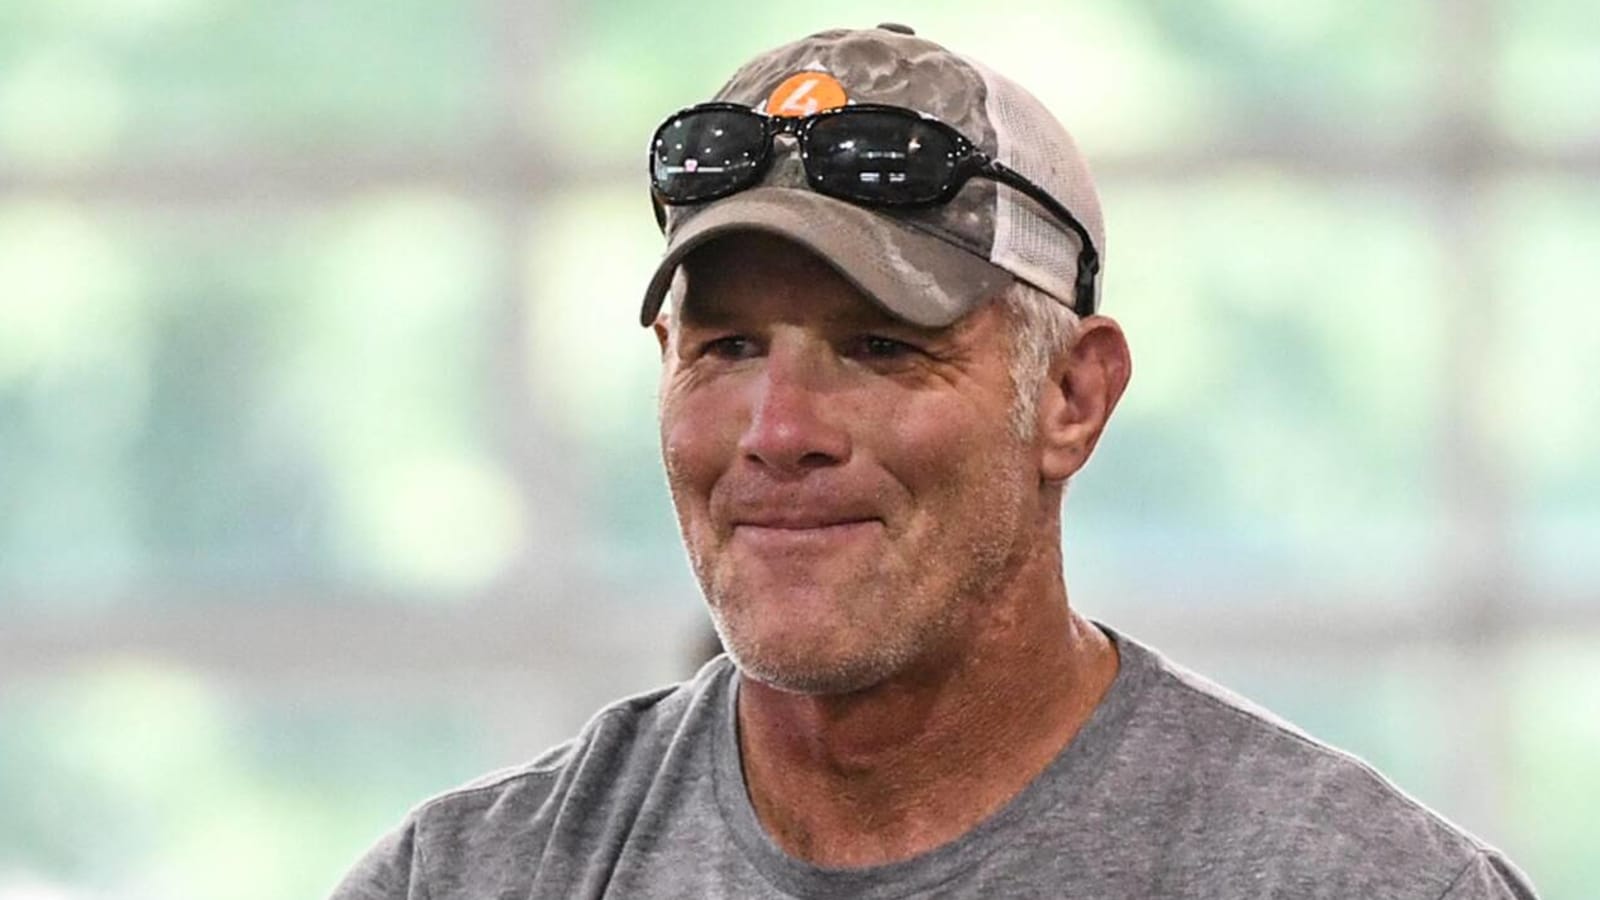 Legal expert: Favre faces 'very high burden' in lawsuits